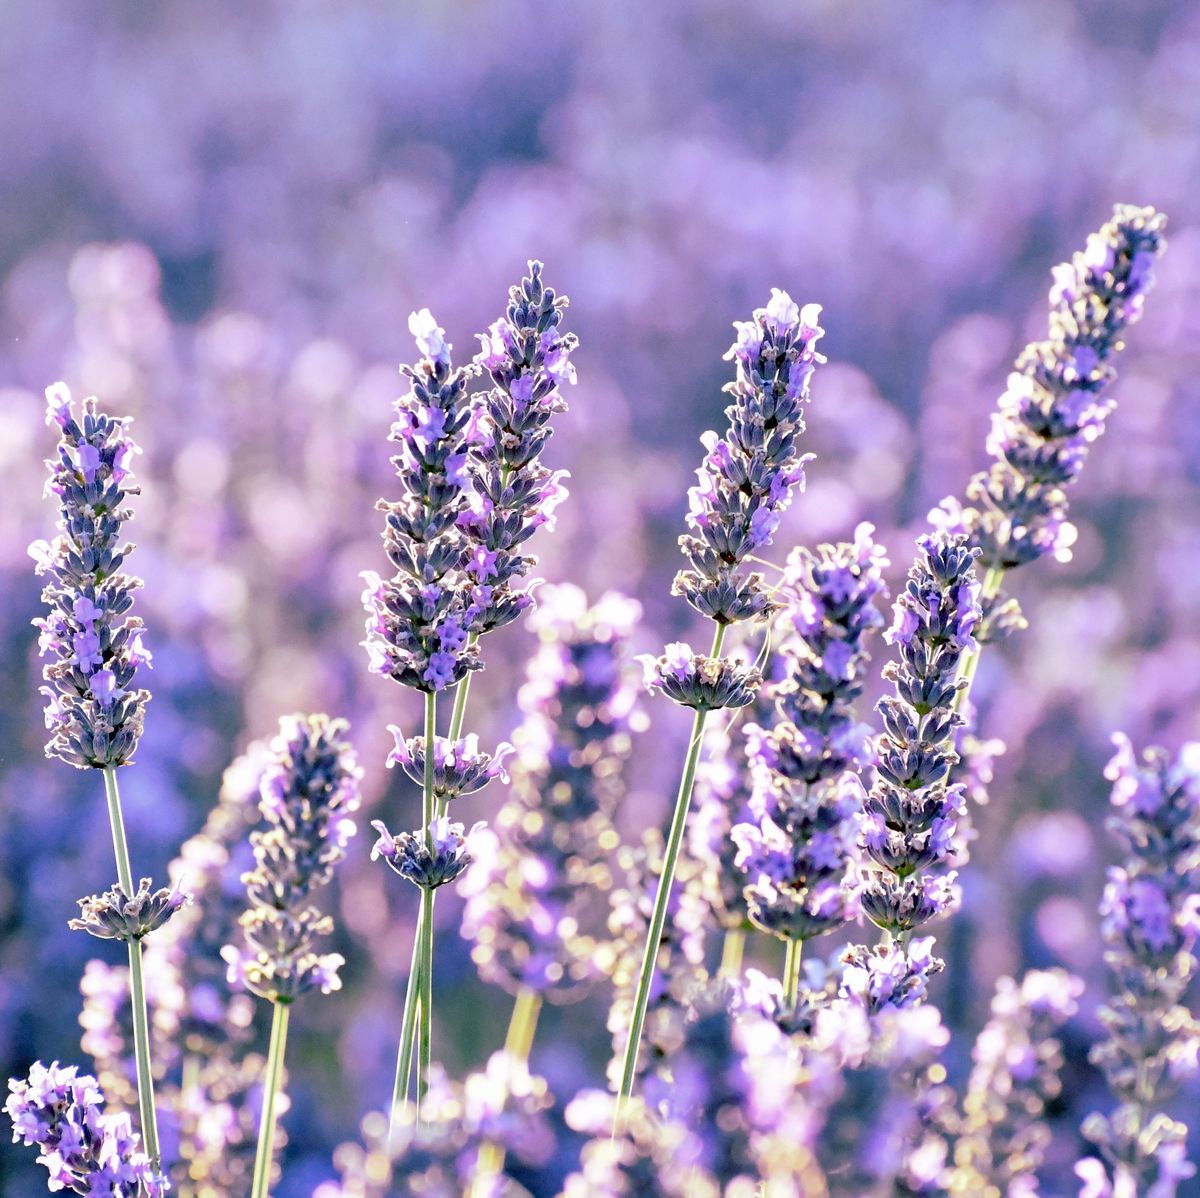 How to Grow Lavender - A Care Guide for Lavender Plants